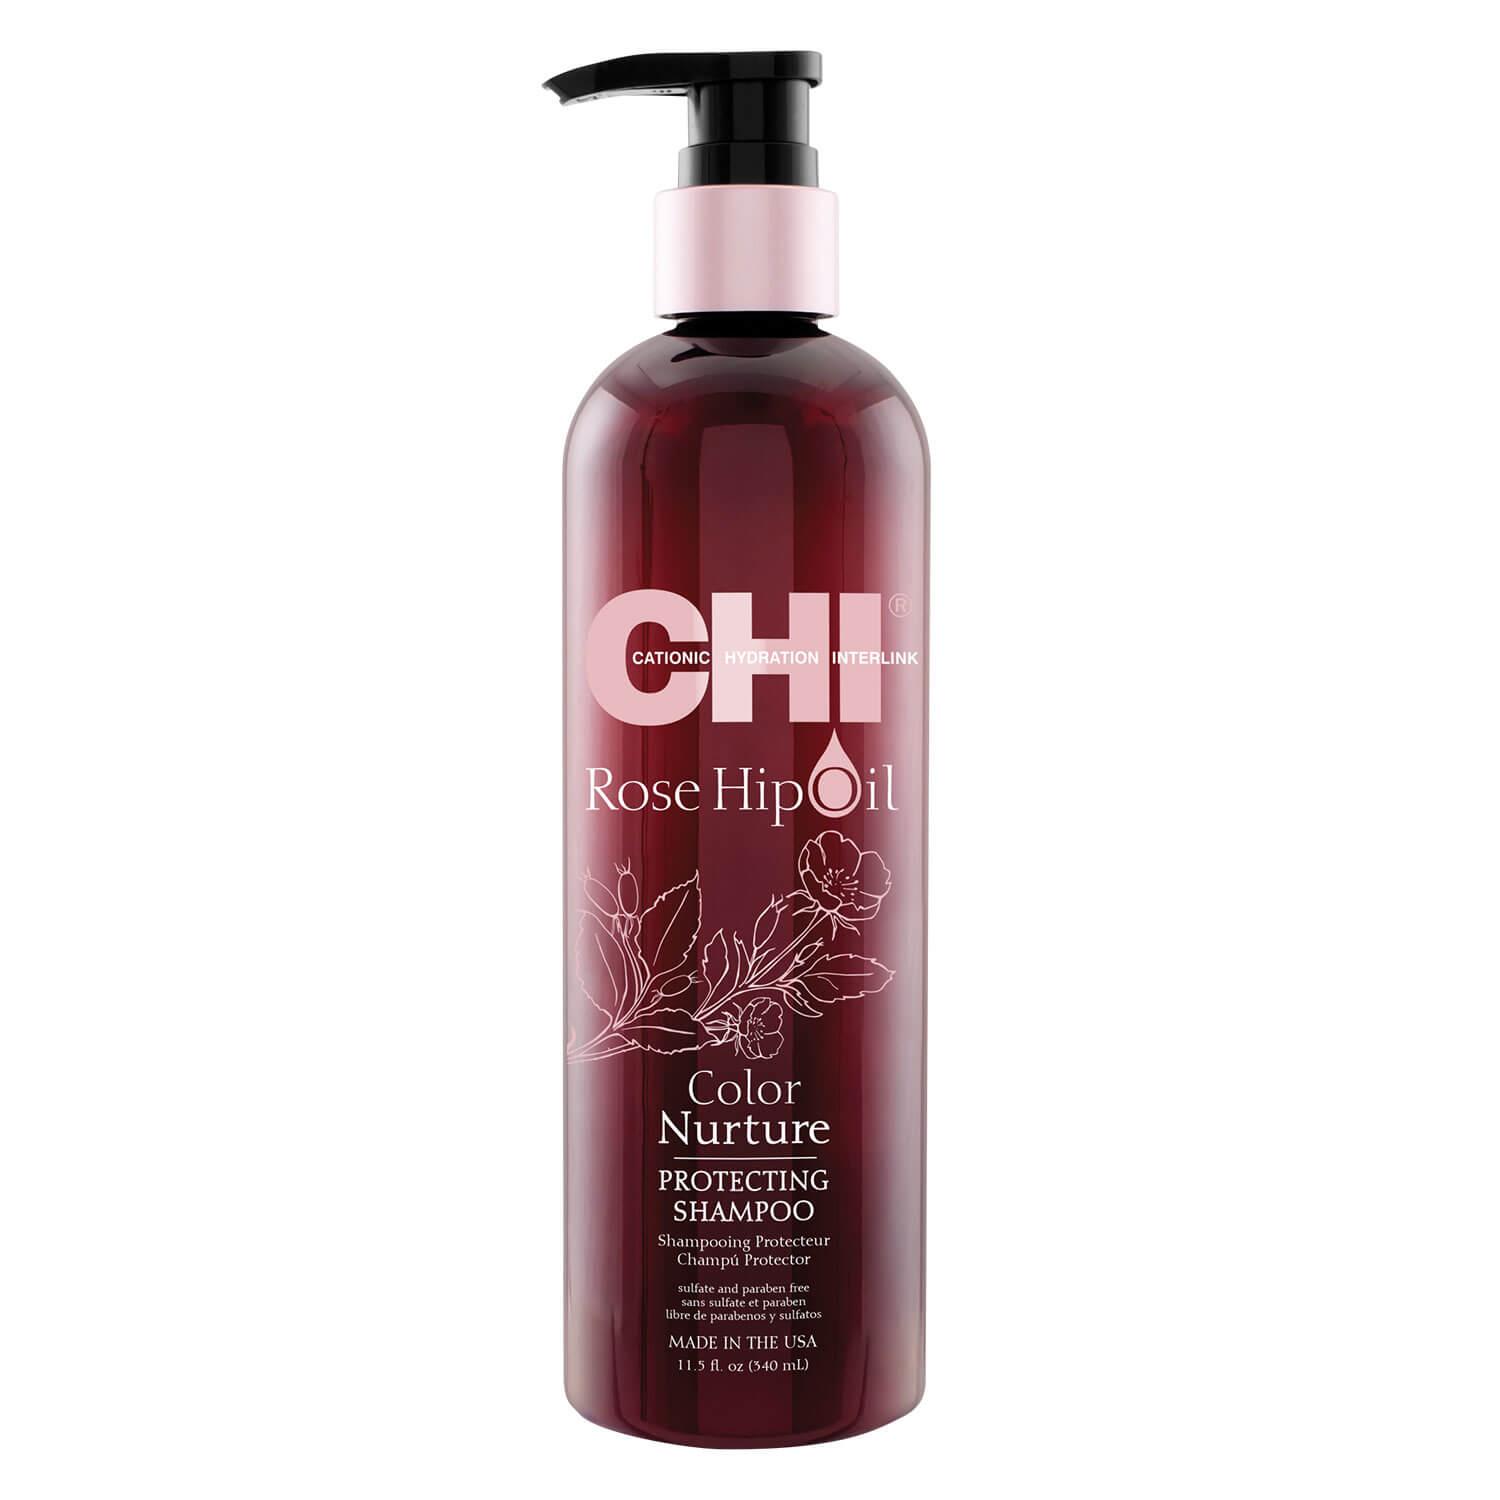 CHI Rose Hip Oil - Protecting Shampoo